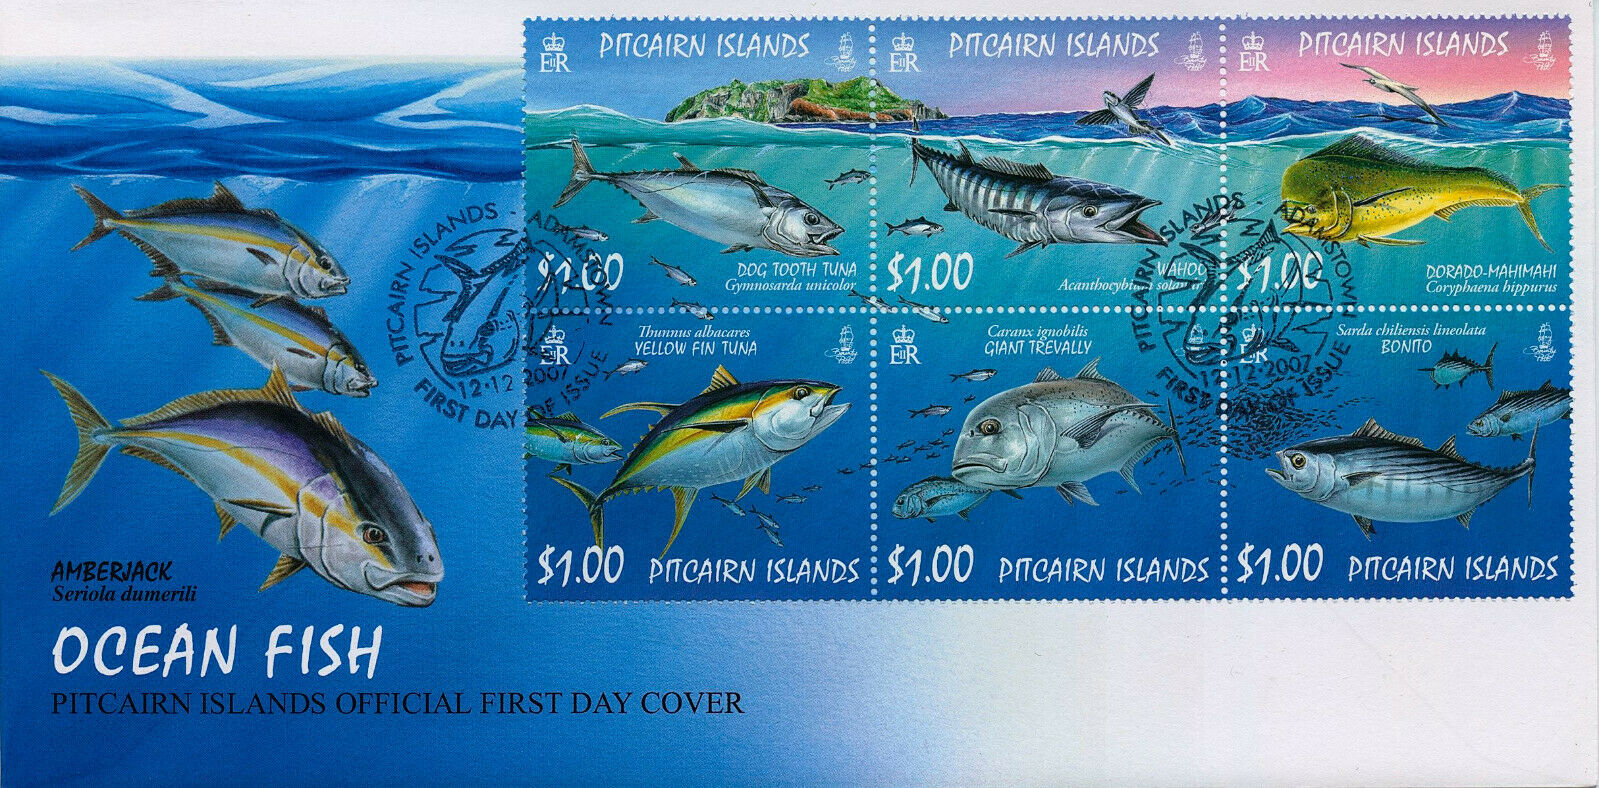 Pitcairn Islands 2007 FDC Fishes Stamps Ocean Fish Tuna Giant Trevally 6v Block